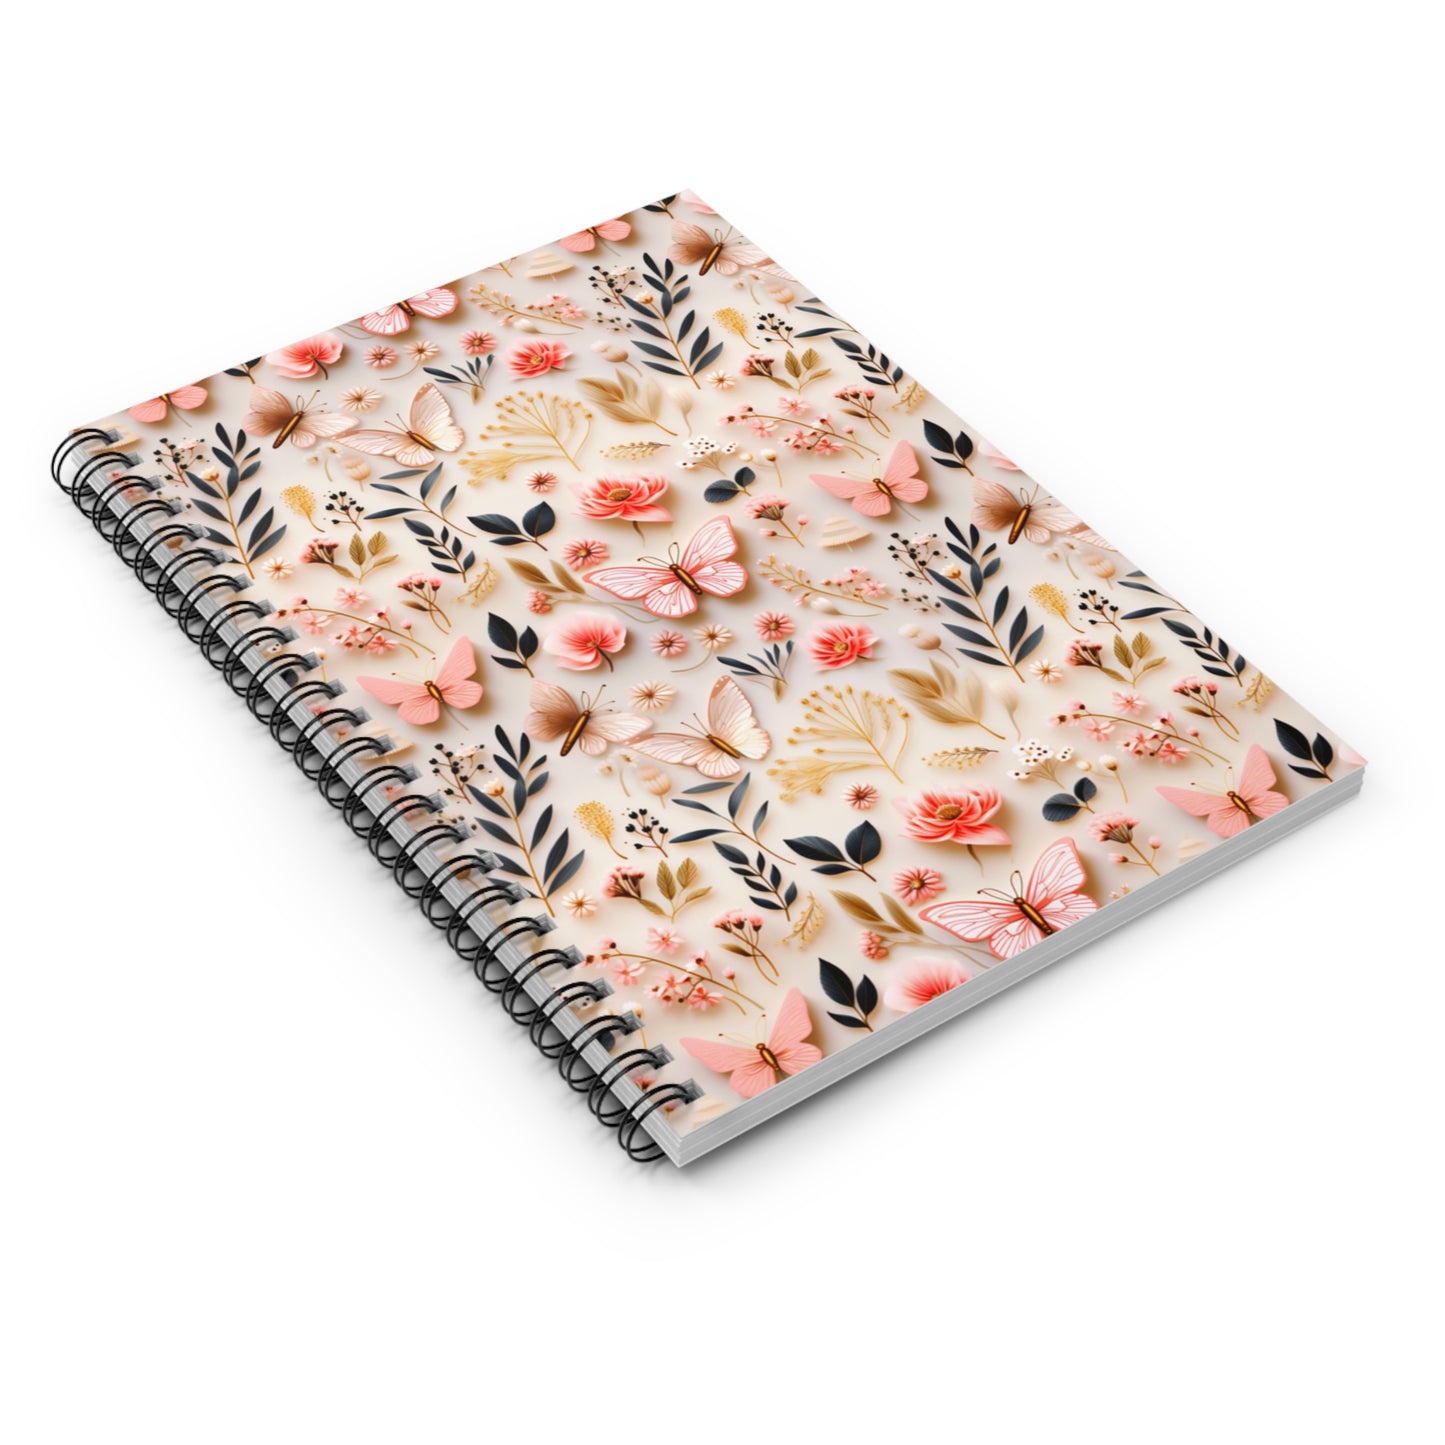 Gilded Butterfly Reverie | Ruled Line Spiral Notebook